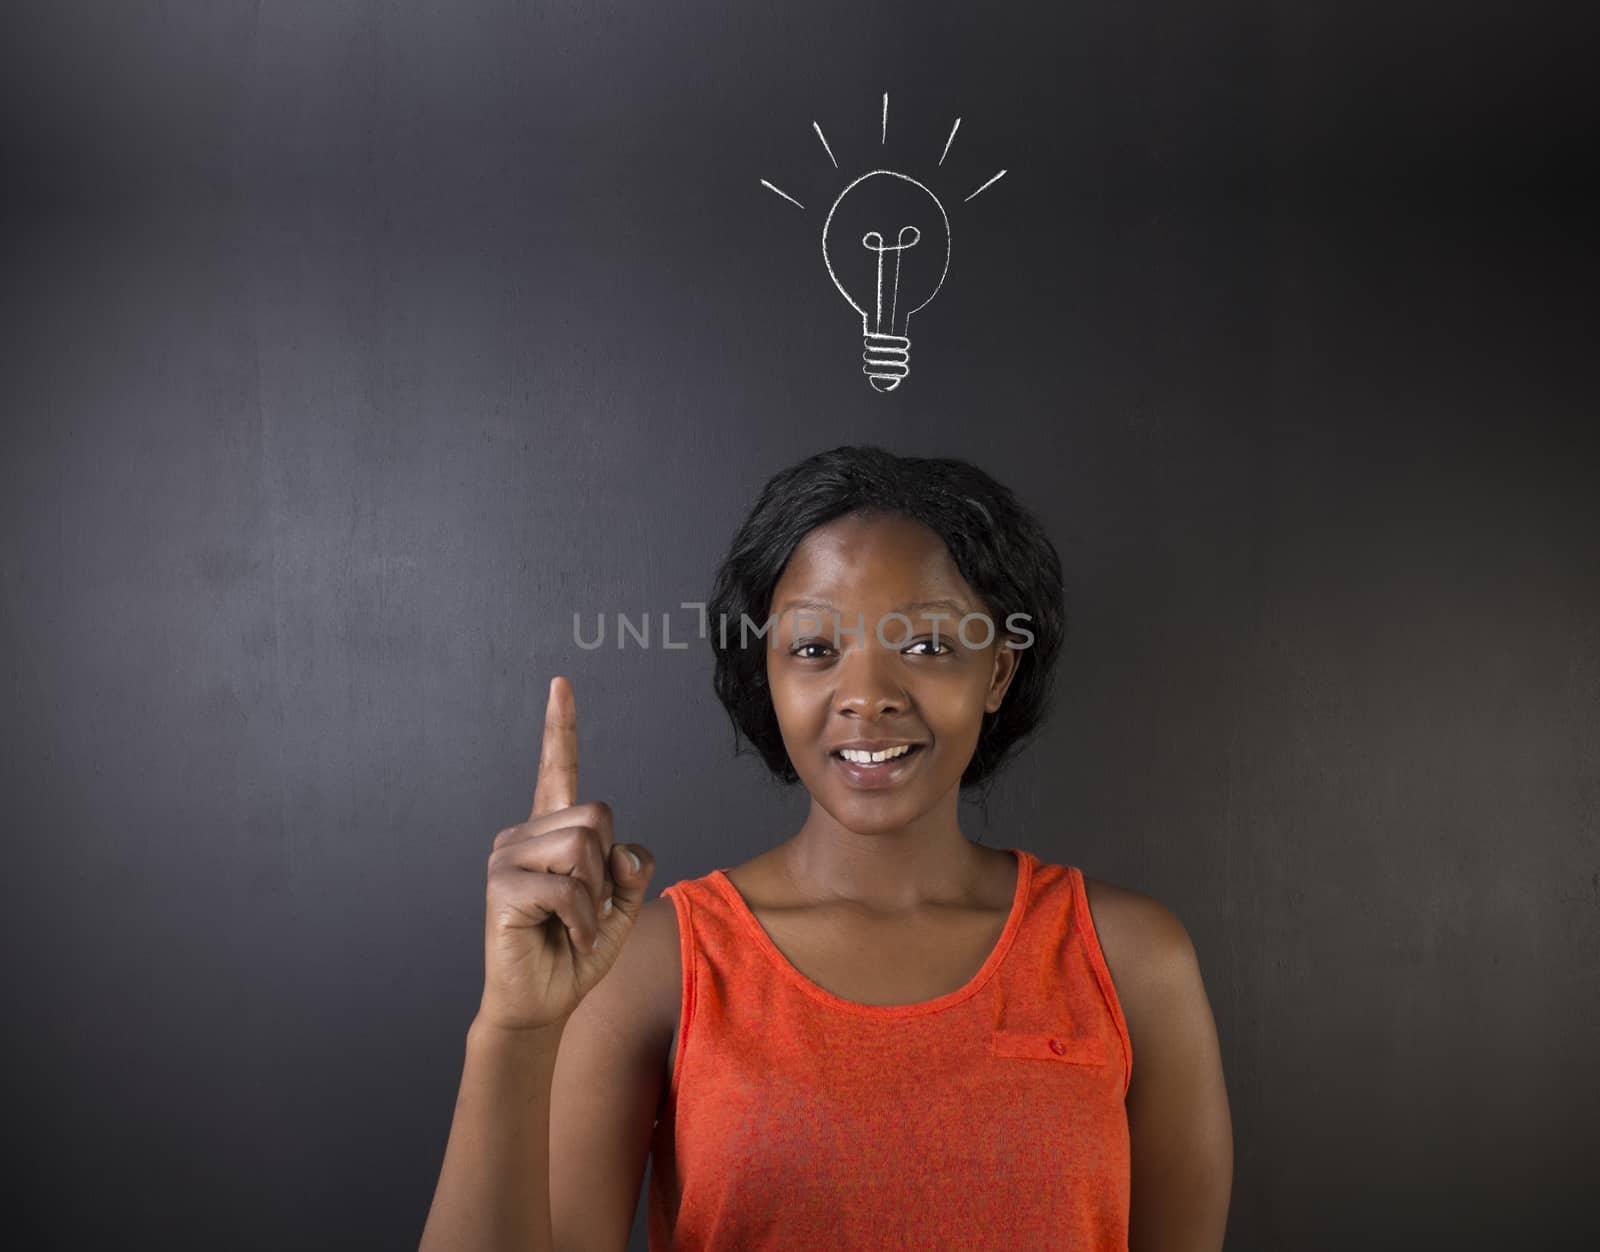 Bright idea chalk background lightbulb thinking South African or African American woman teacher or student on a blackboard